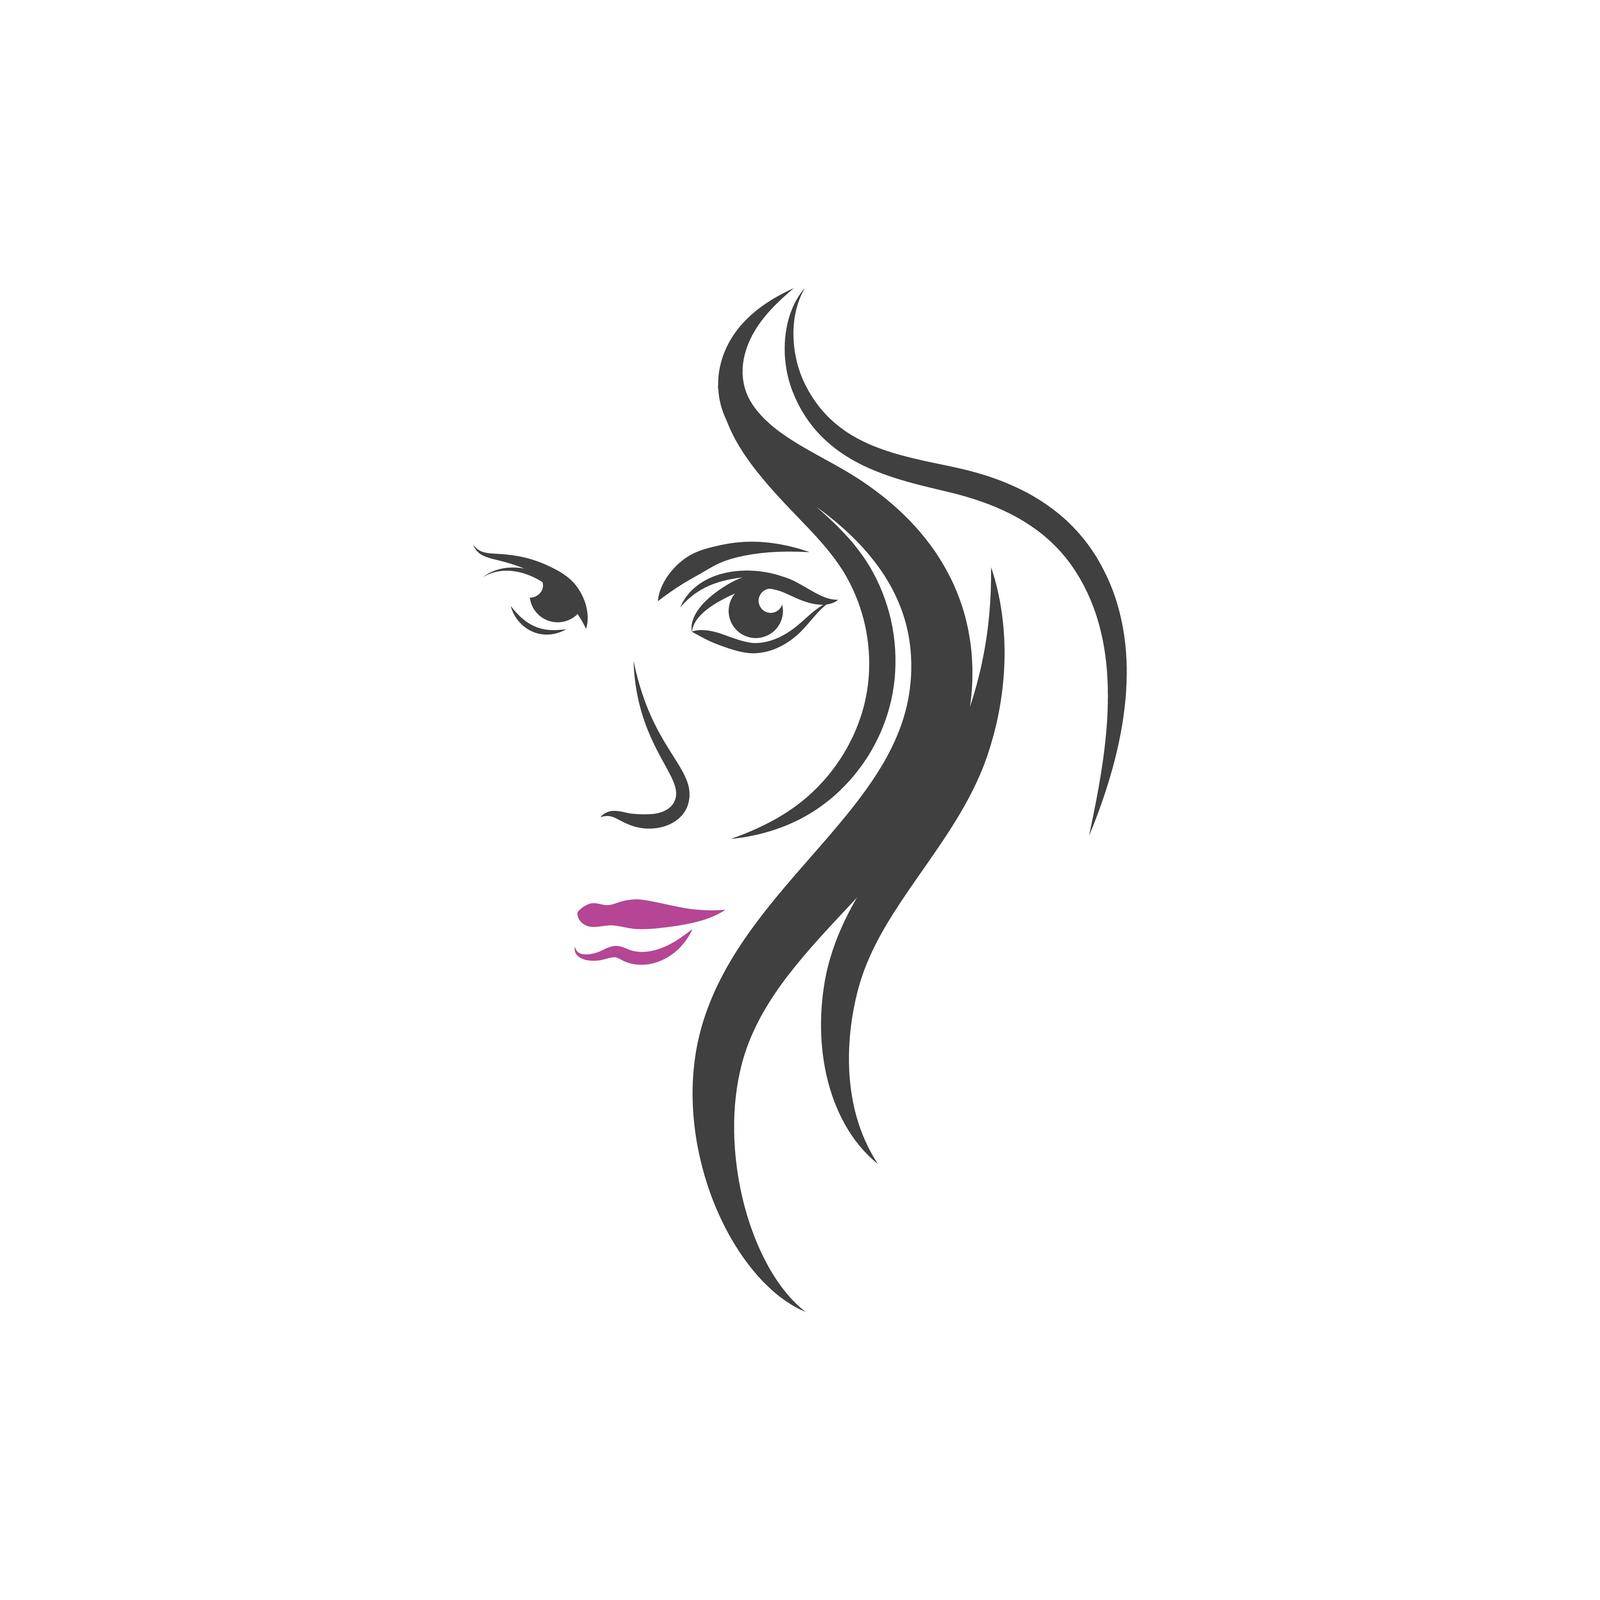 Woman face silhouette character illustration by hypeStudio